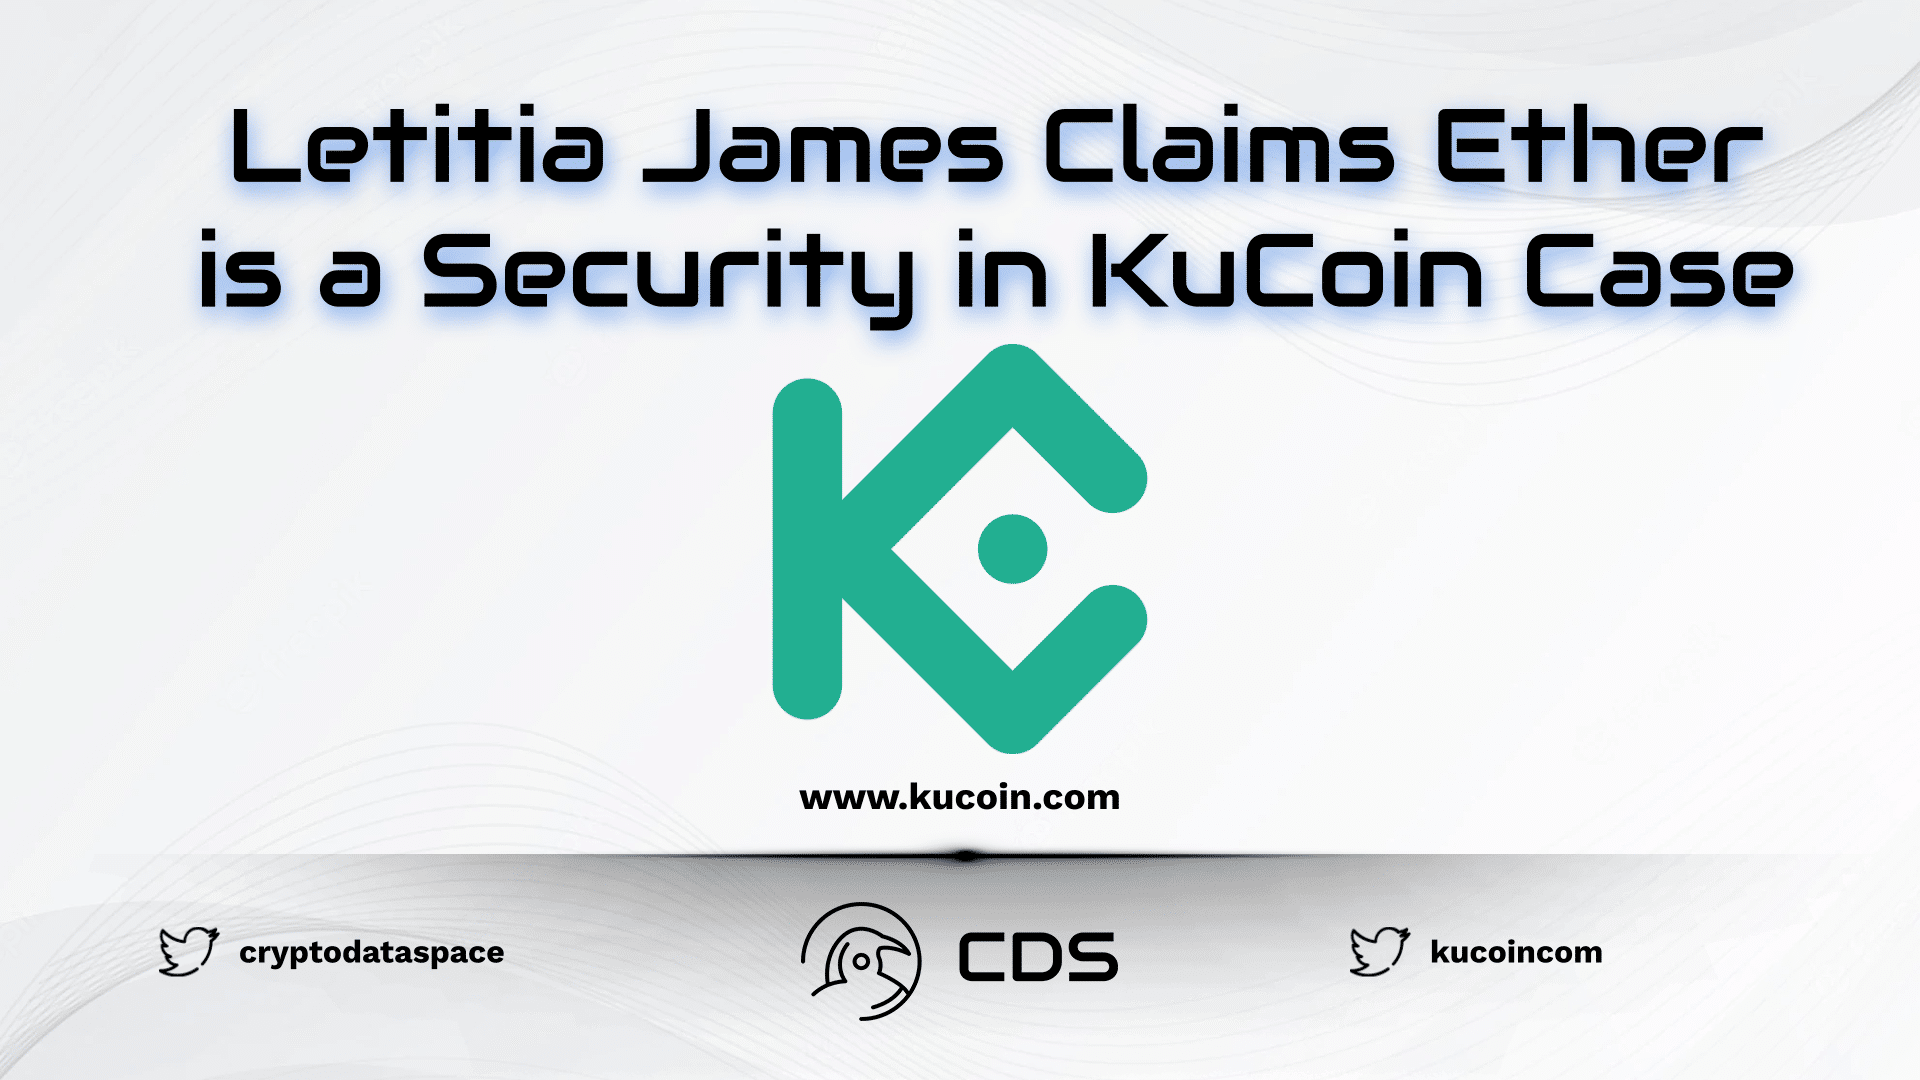 Letitia James Claims Ether is a Security in KuCoin Case